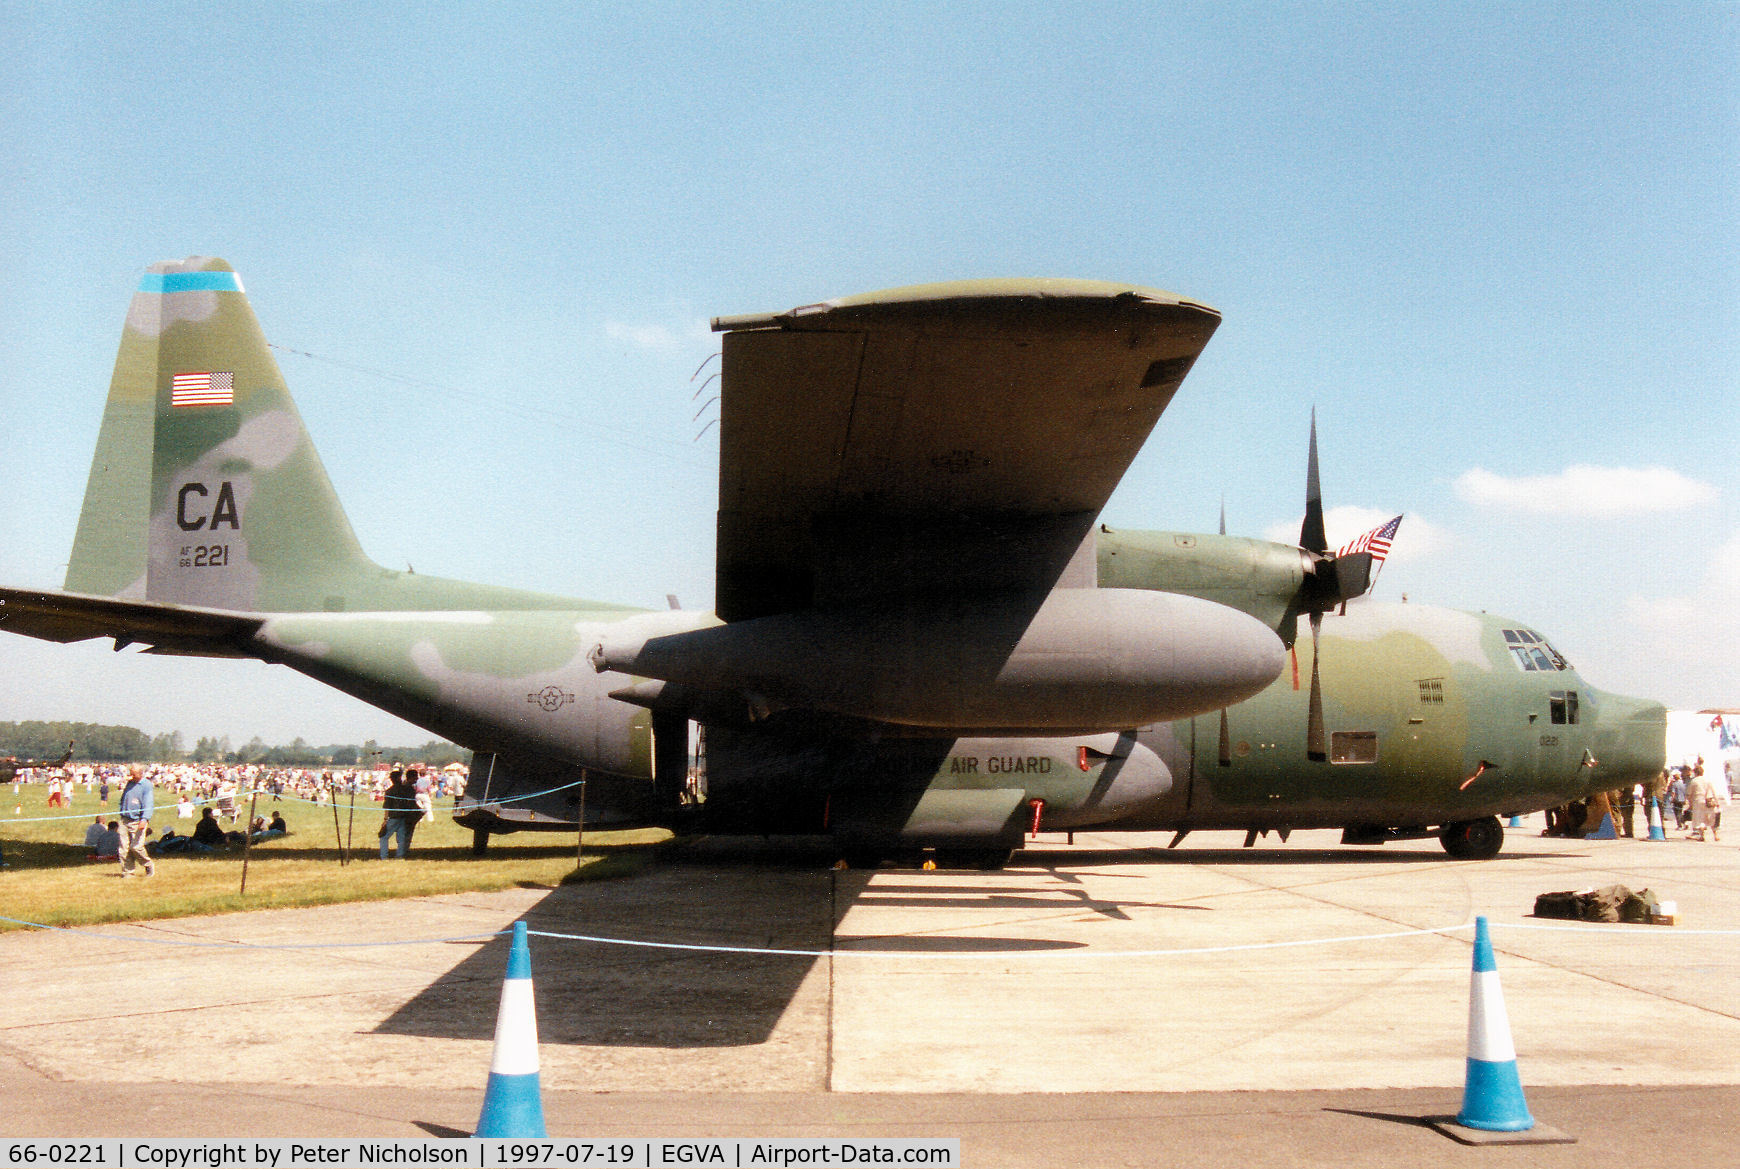 66-0221, 1966 Lockheed HC-130P Hercules C/N 382-4183, HC-130P Hercules, callsign King 61, of 129th Rescue Squadron on display at the 1997 Intnl Air Tattoo at RAF Fairford.